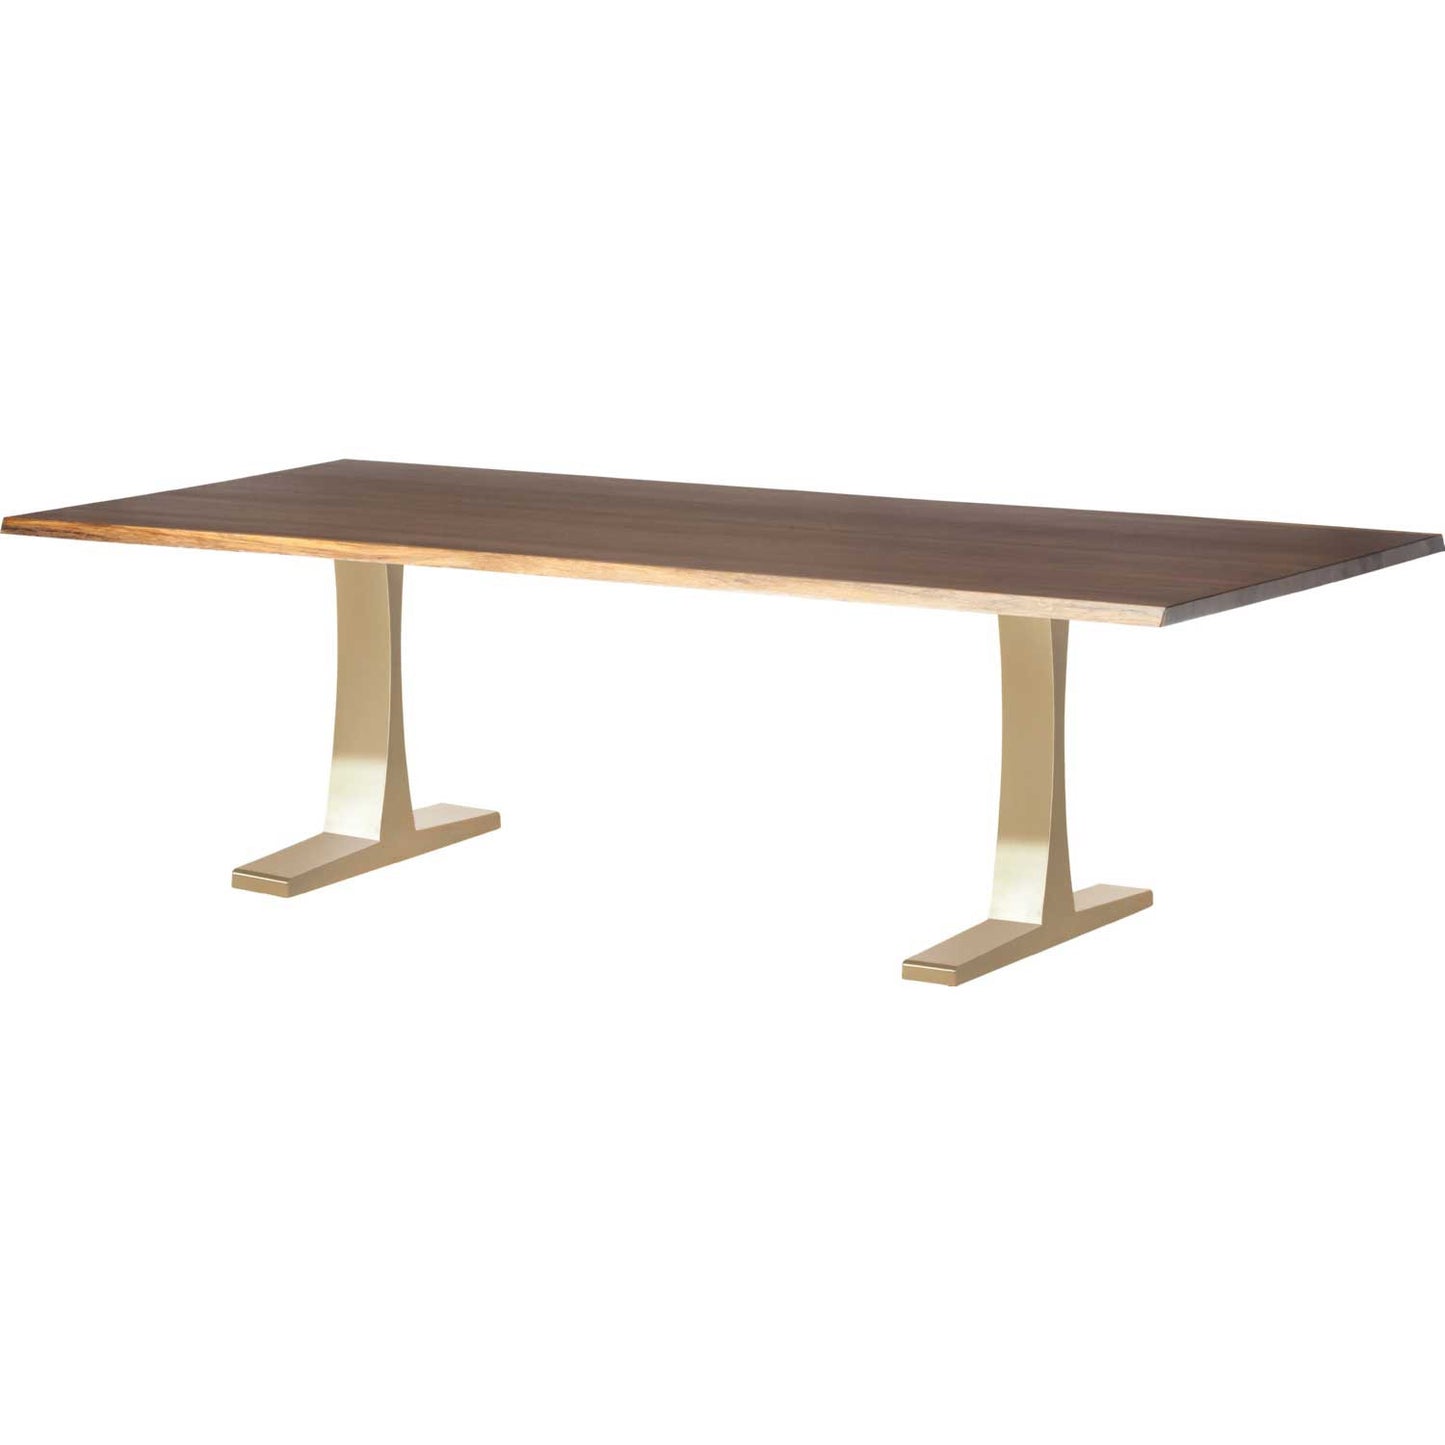 Toulouse Seared Wood Dining Table TABLE Nuevo     Four Hands, Burke Decor, Mid Century Modern Furniture, Old Bones Furniture Company, Old Bones Co, Modern Mid Century, Designer Furniture, https://www.oldbonesco.com/